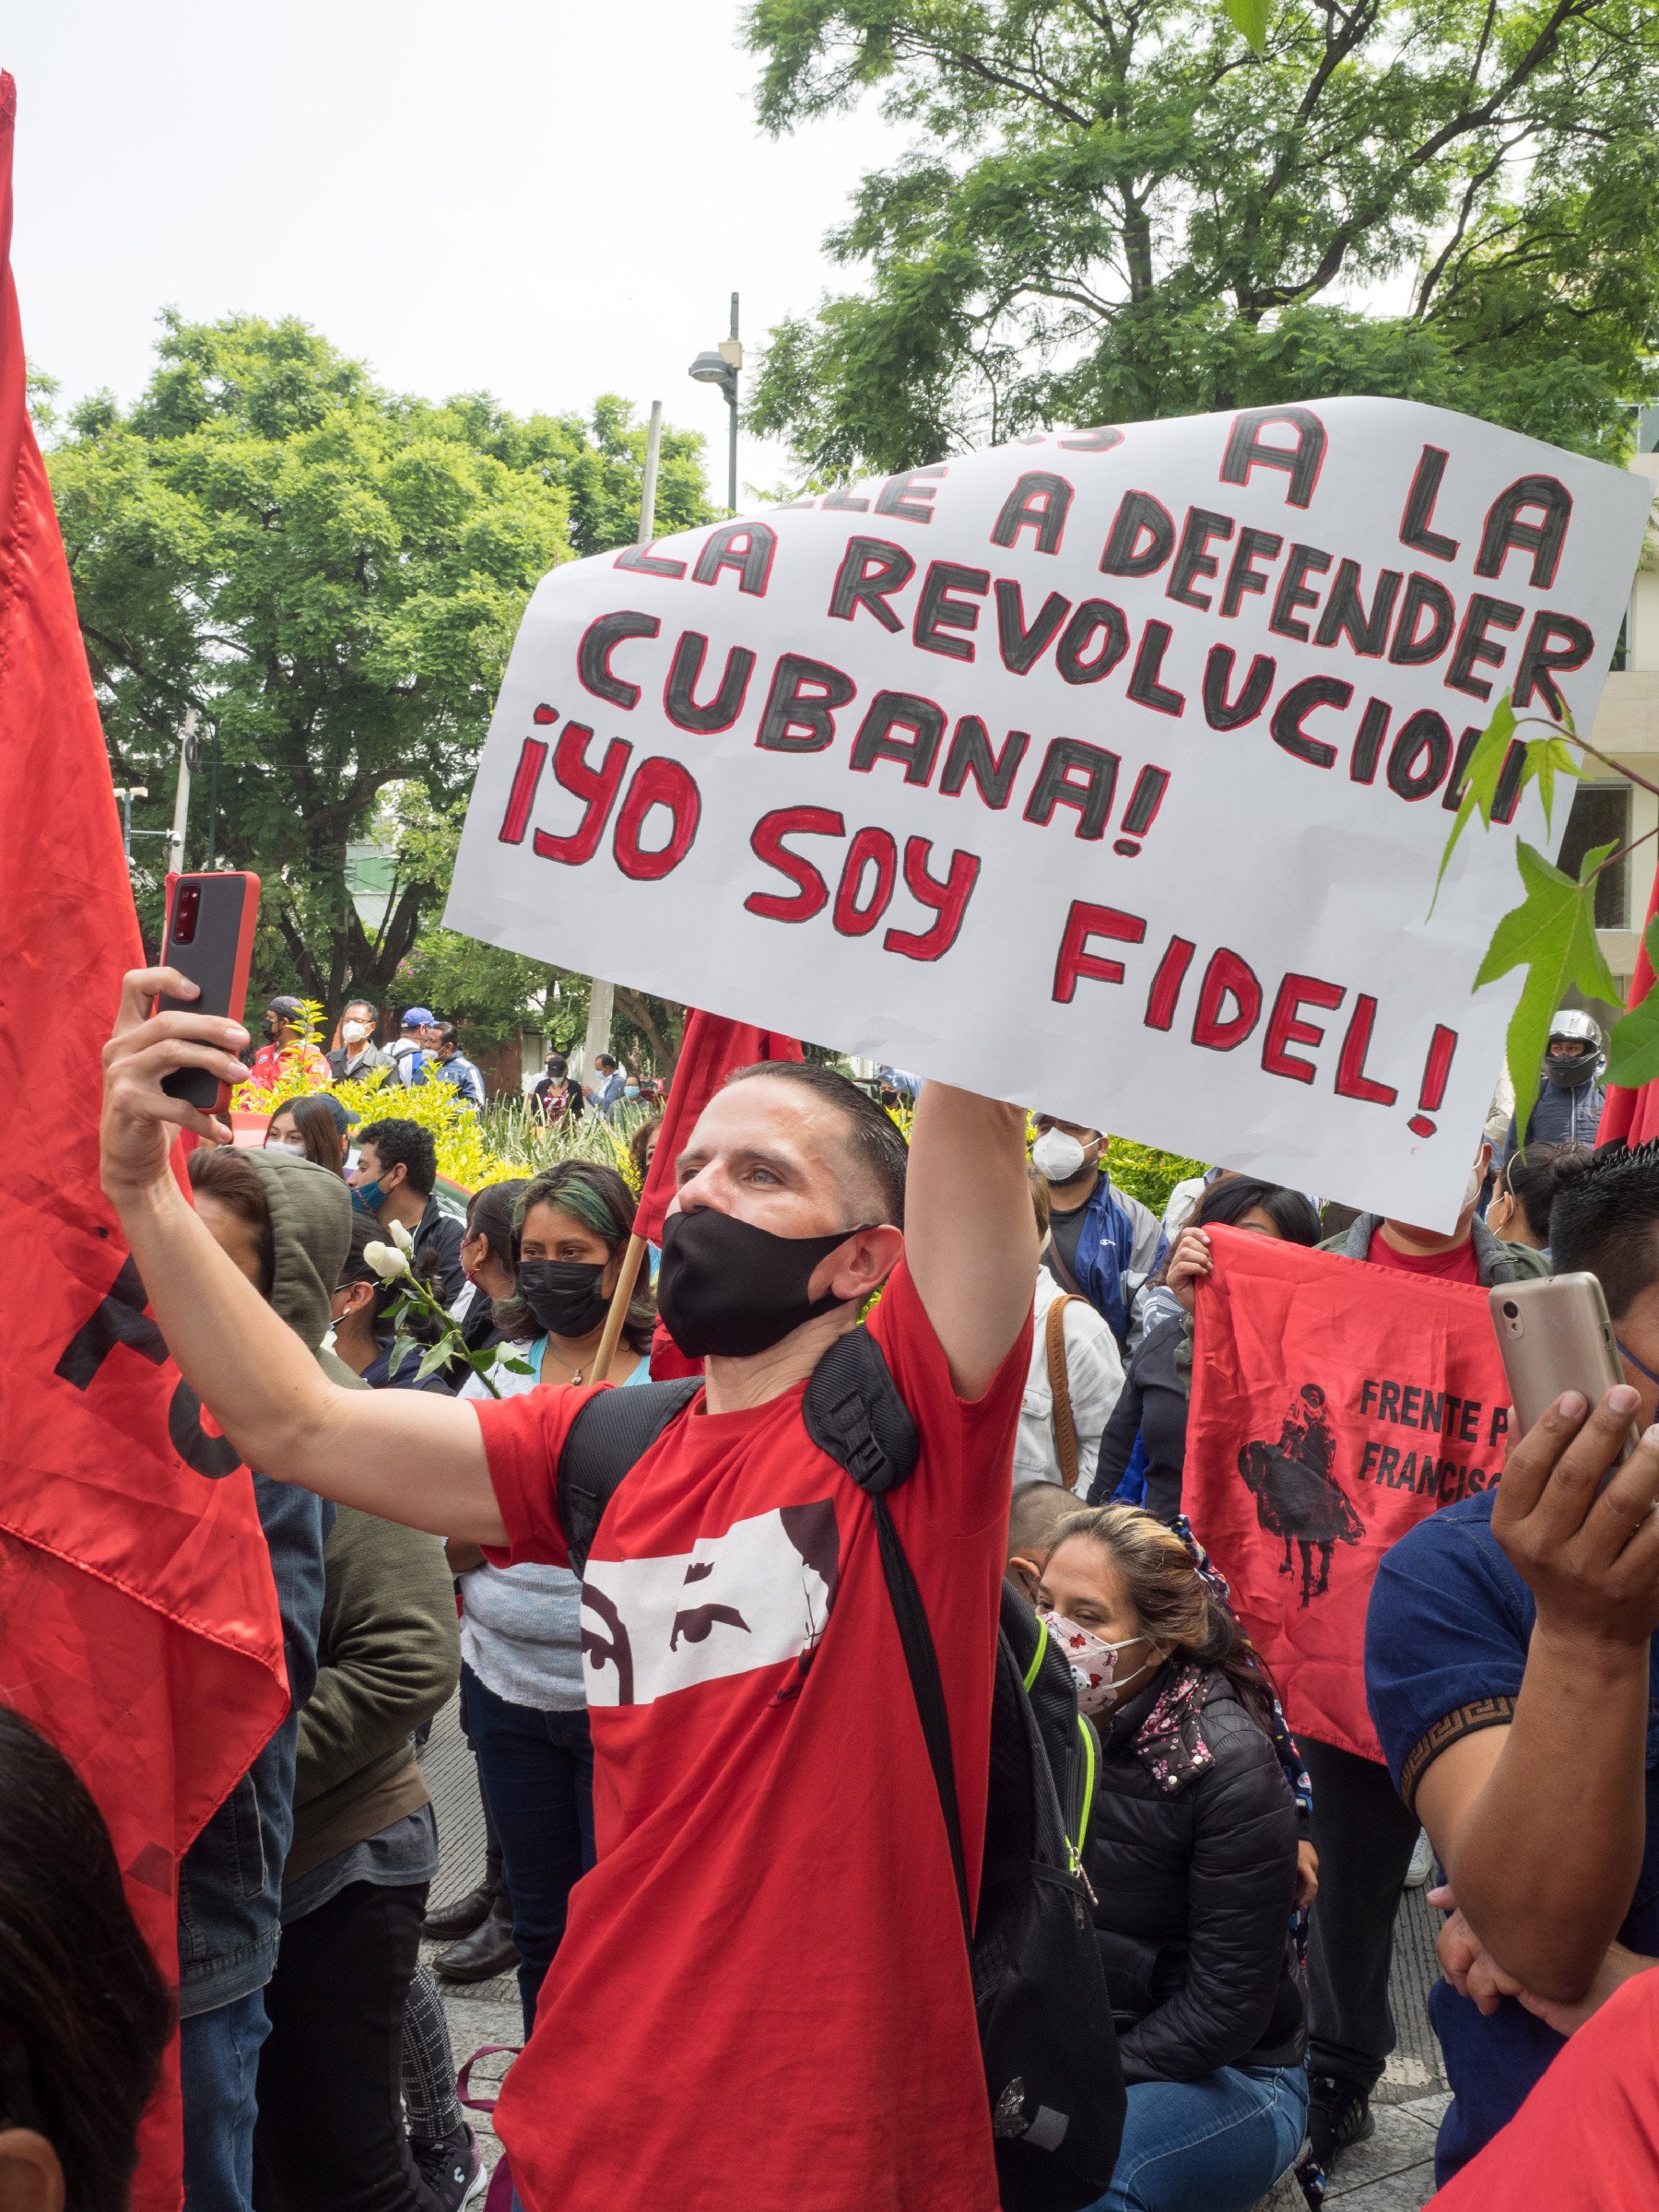 A demonstrator holds up a sign that reads "I am Fidel" during a demonstration in solidarity with the Cuban Revolution in front of the Cuban embassy in Mexico City, Mexico, July 17, 2021.